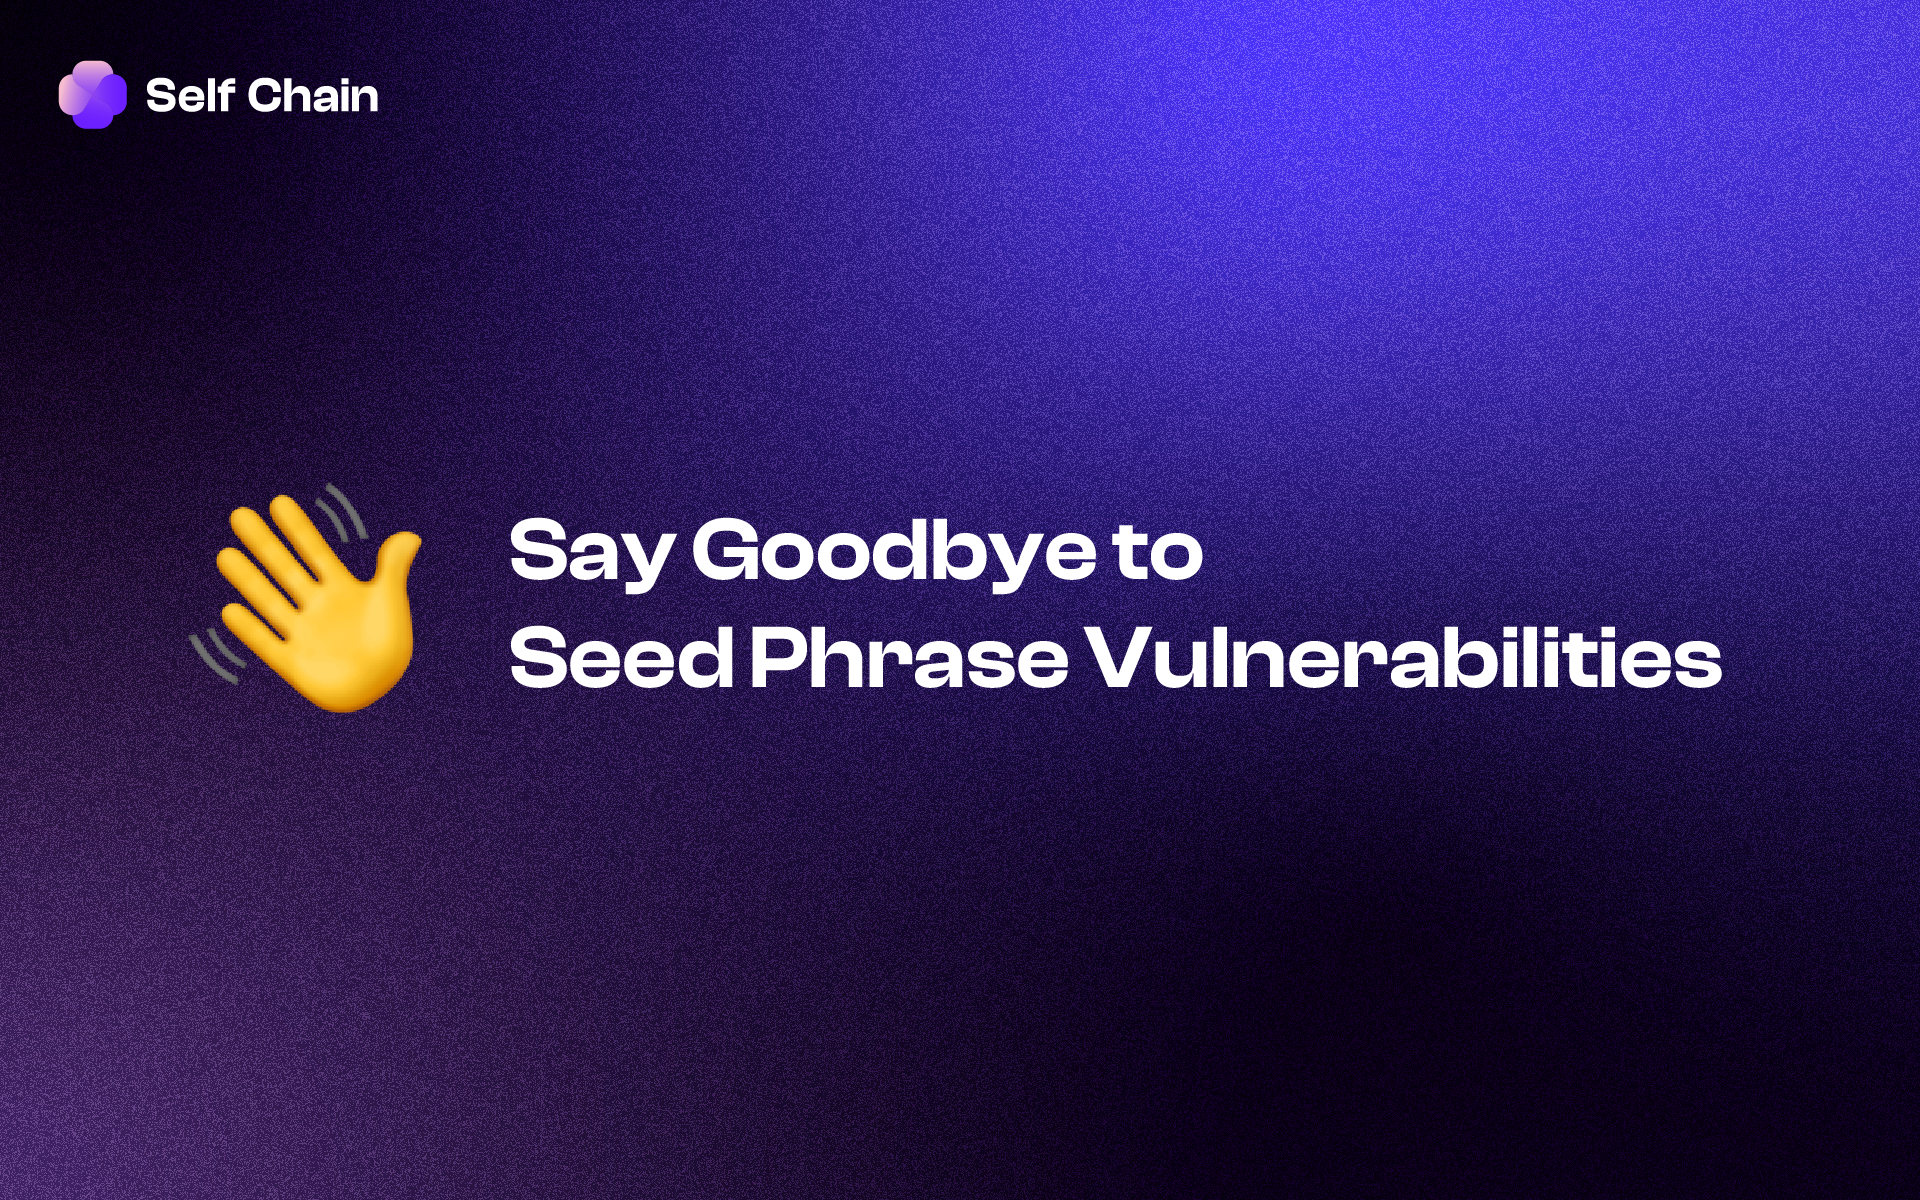 Say Goodbye to Seed Phrase Vulnerabilities